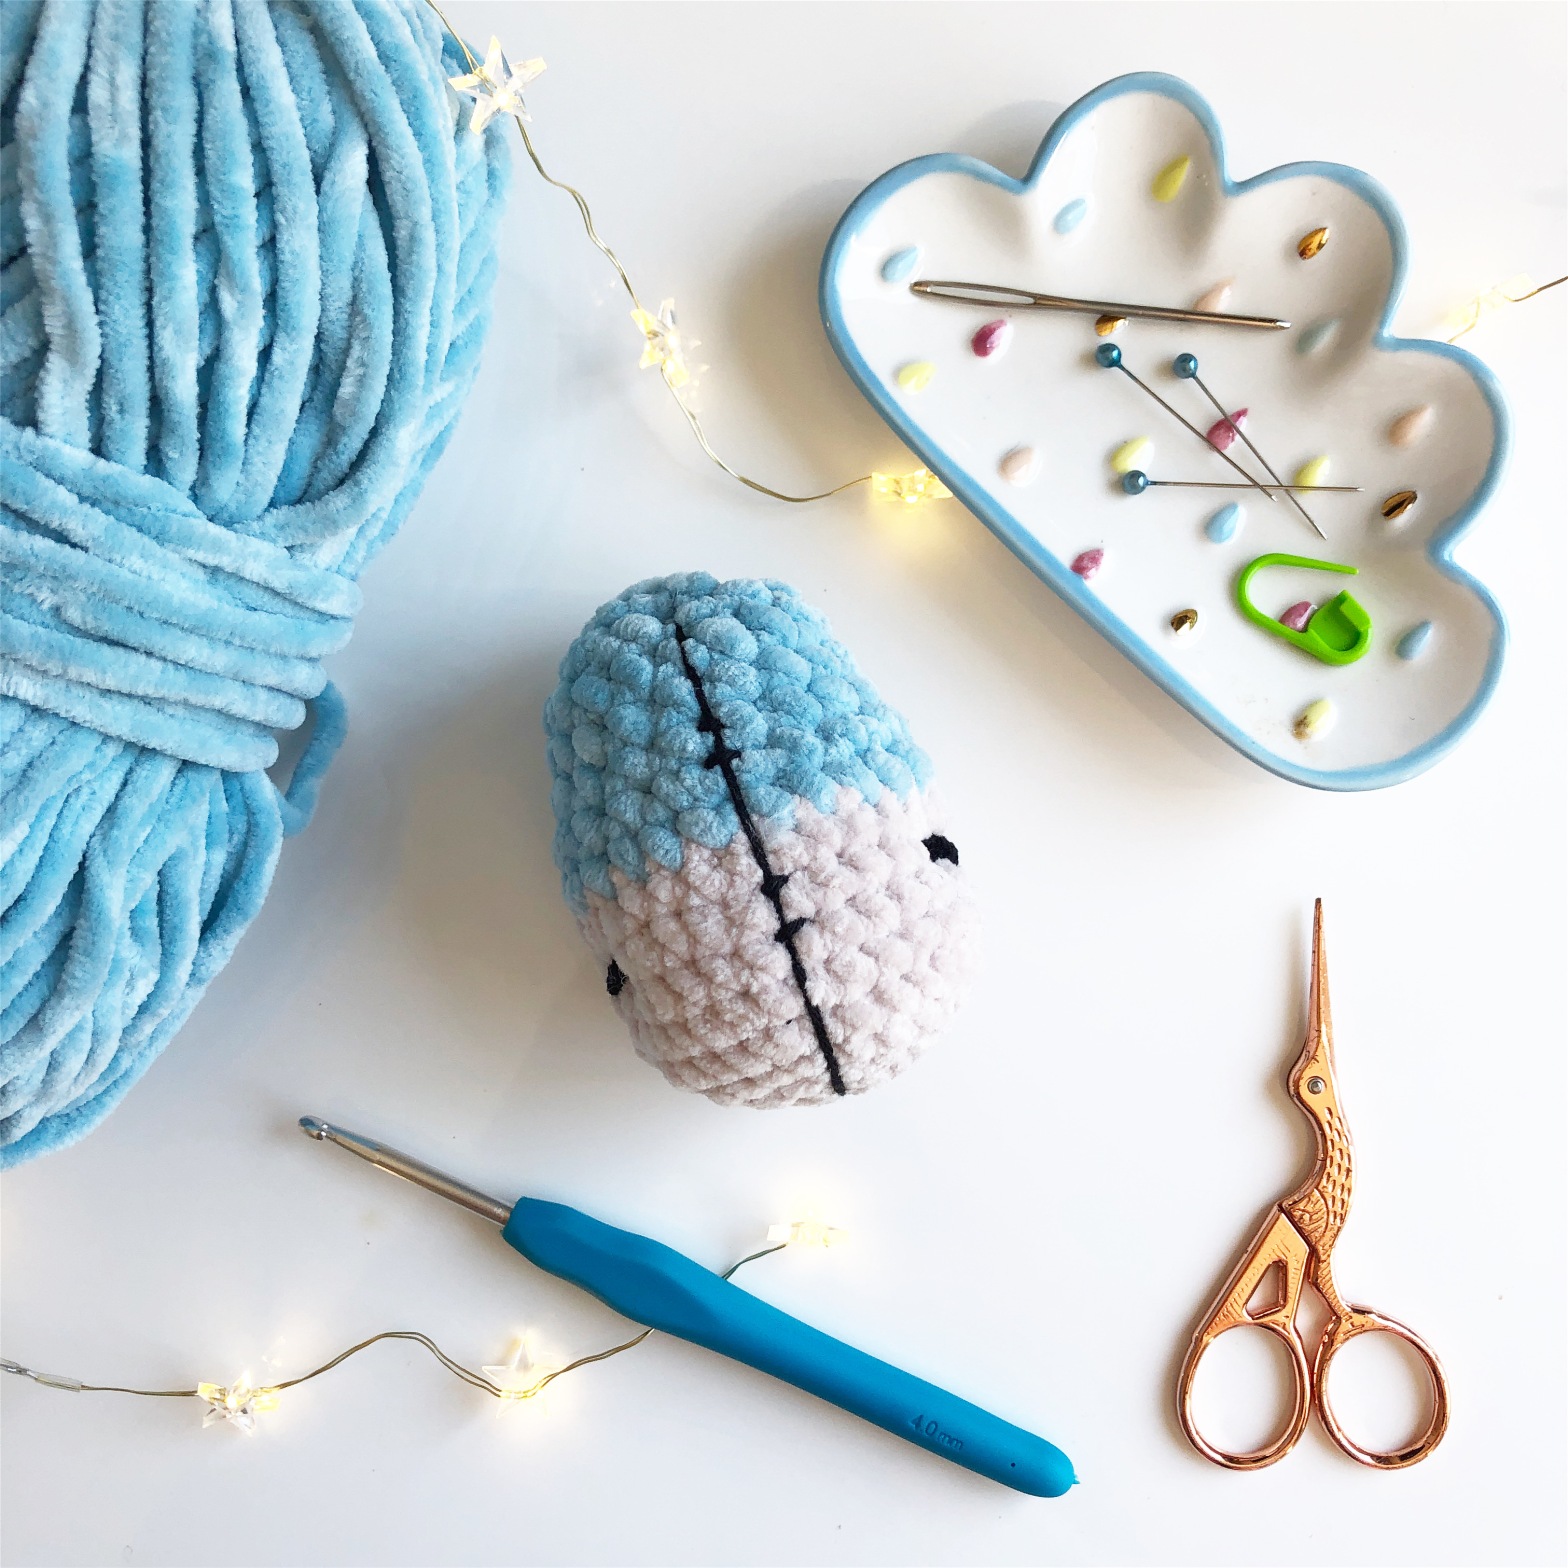 Want to learn to crochet but don't know where to start? – CatCrochets